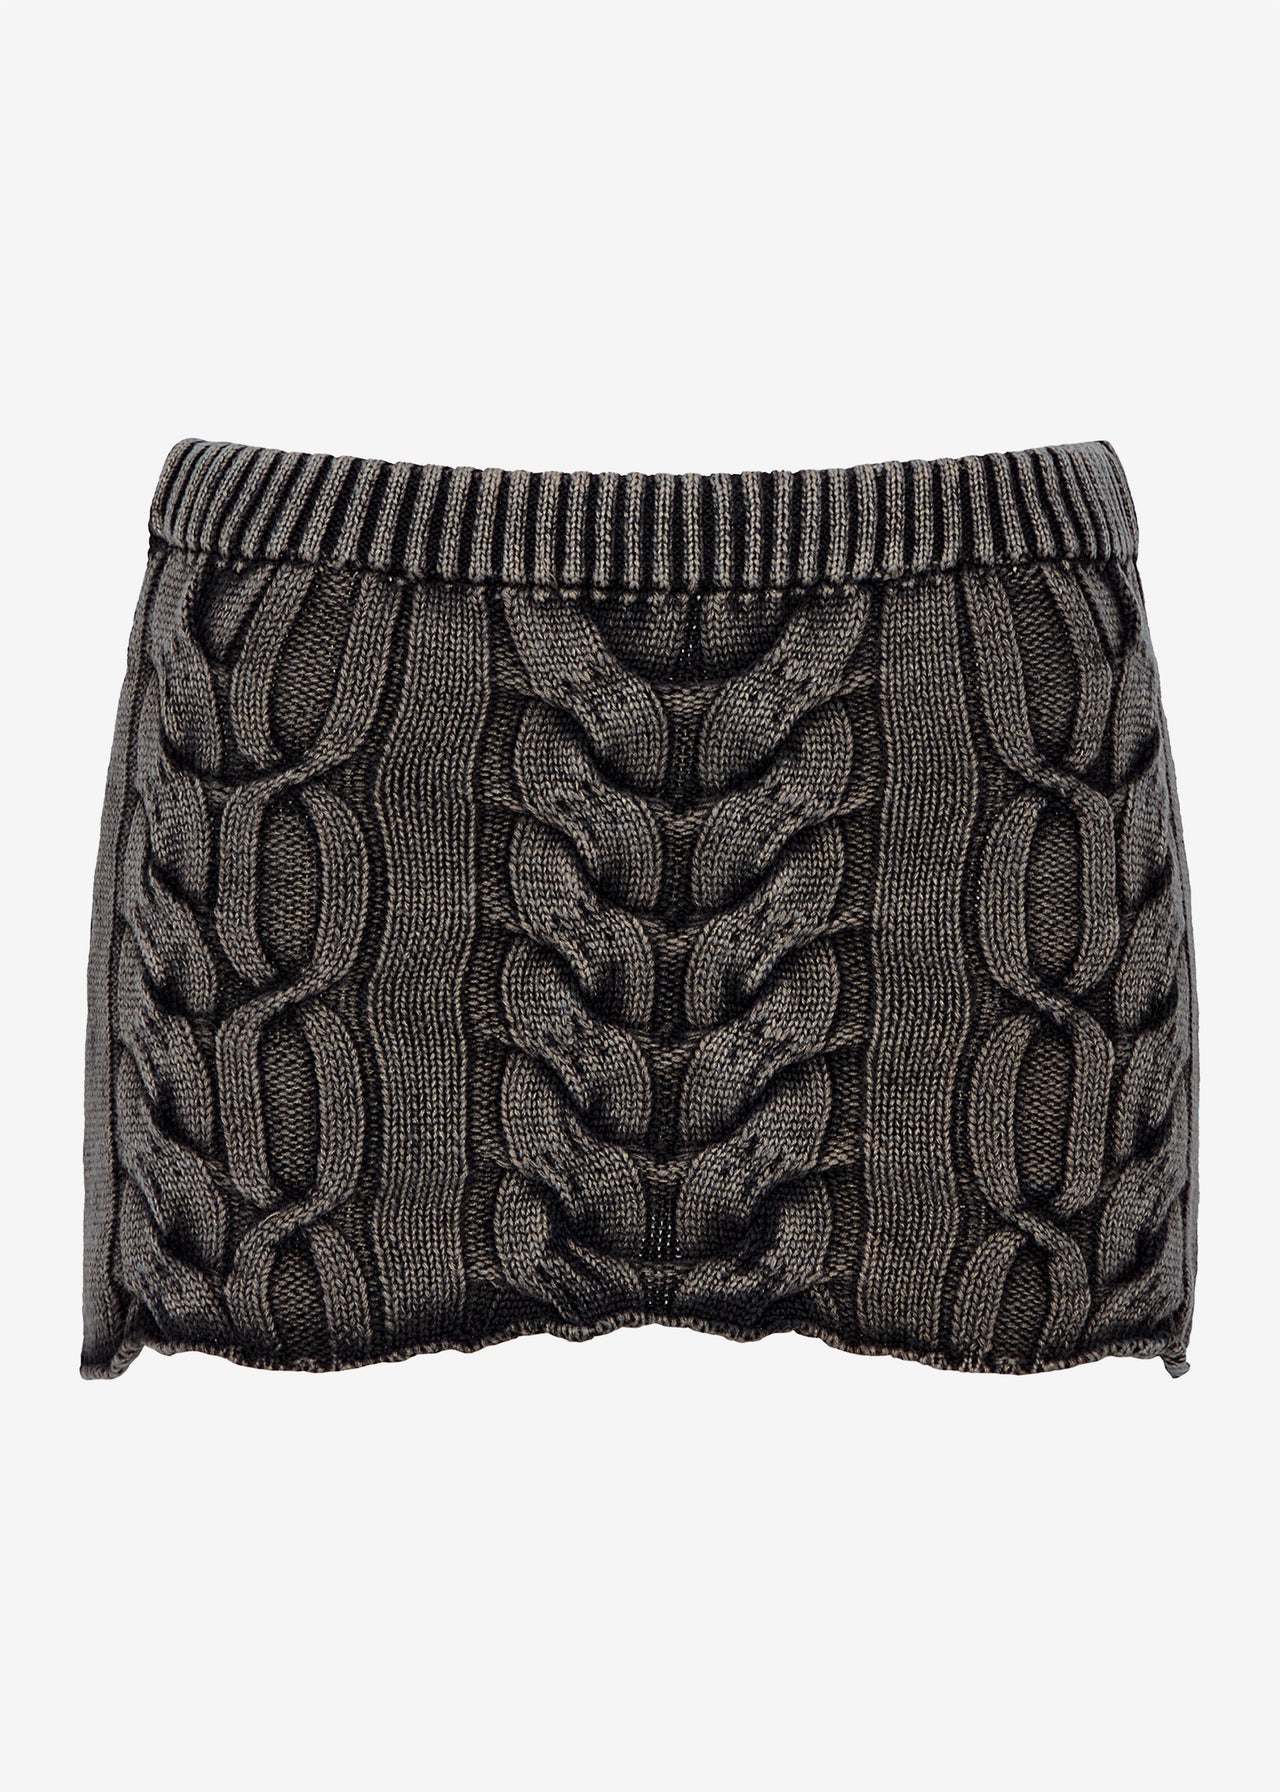 Indra Cable Knit Skirt